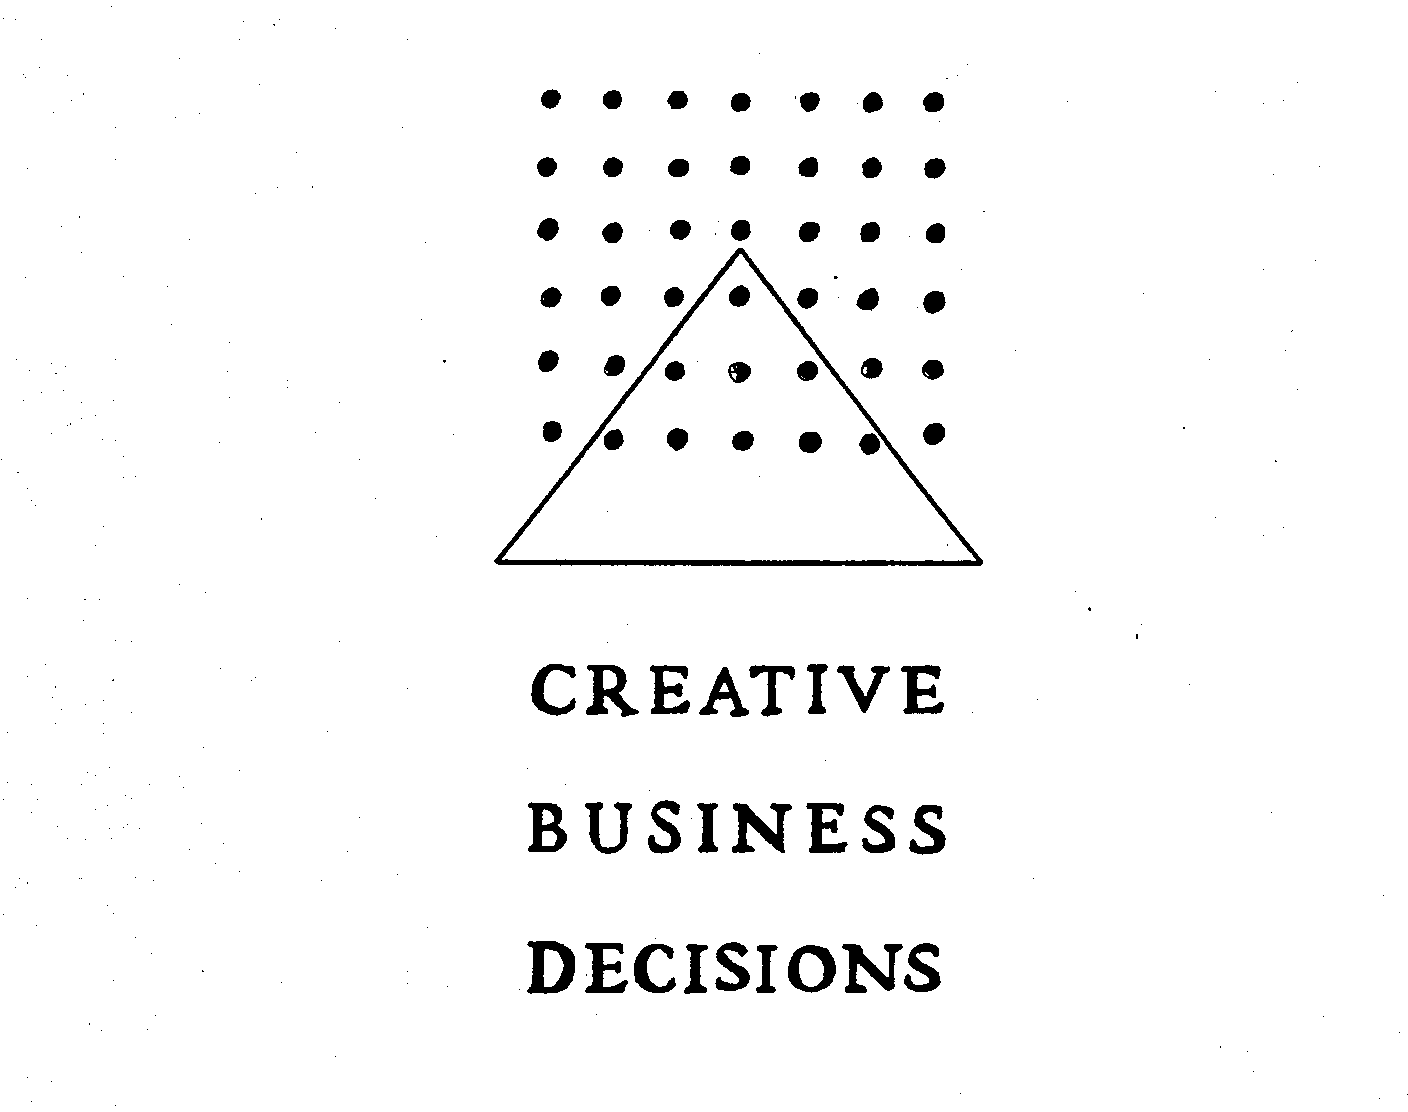  CREATIVE BUSINESS DECISIONS